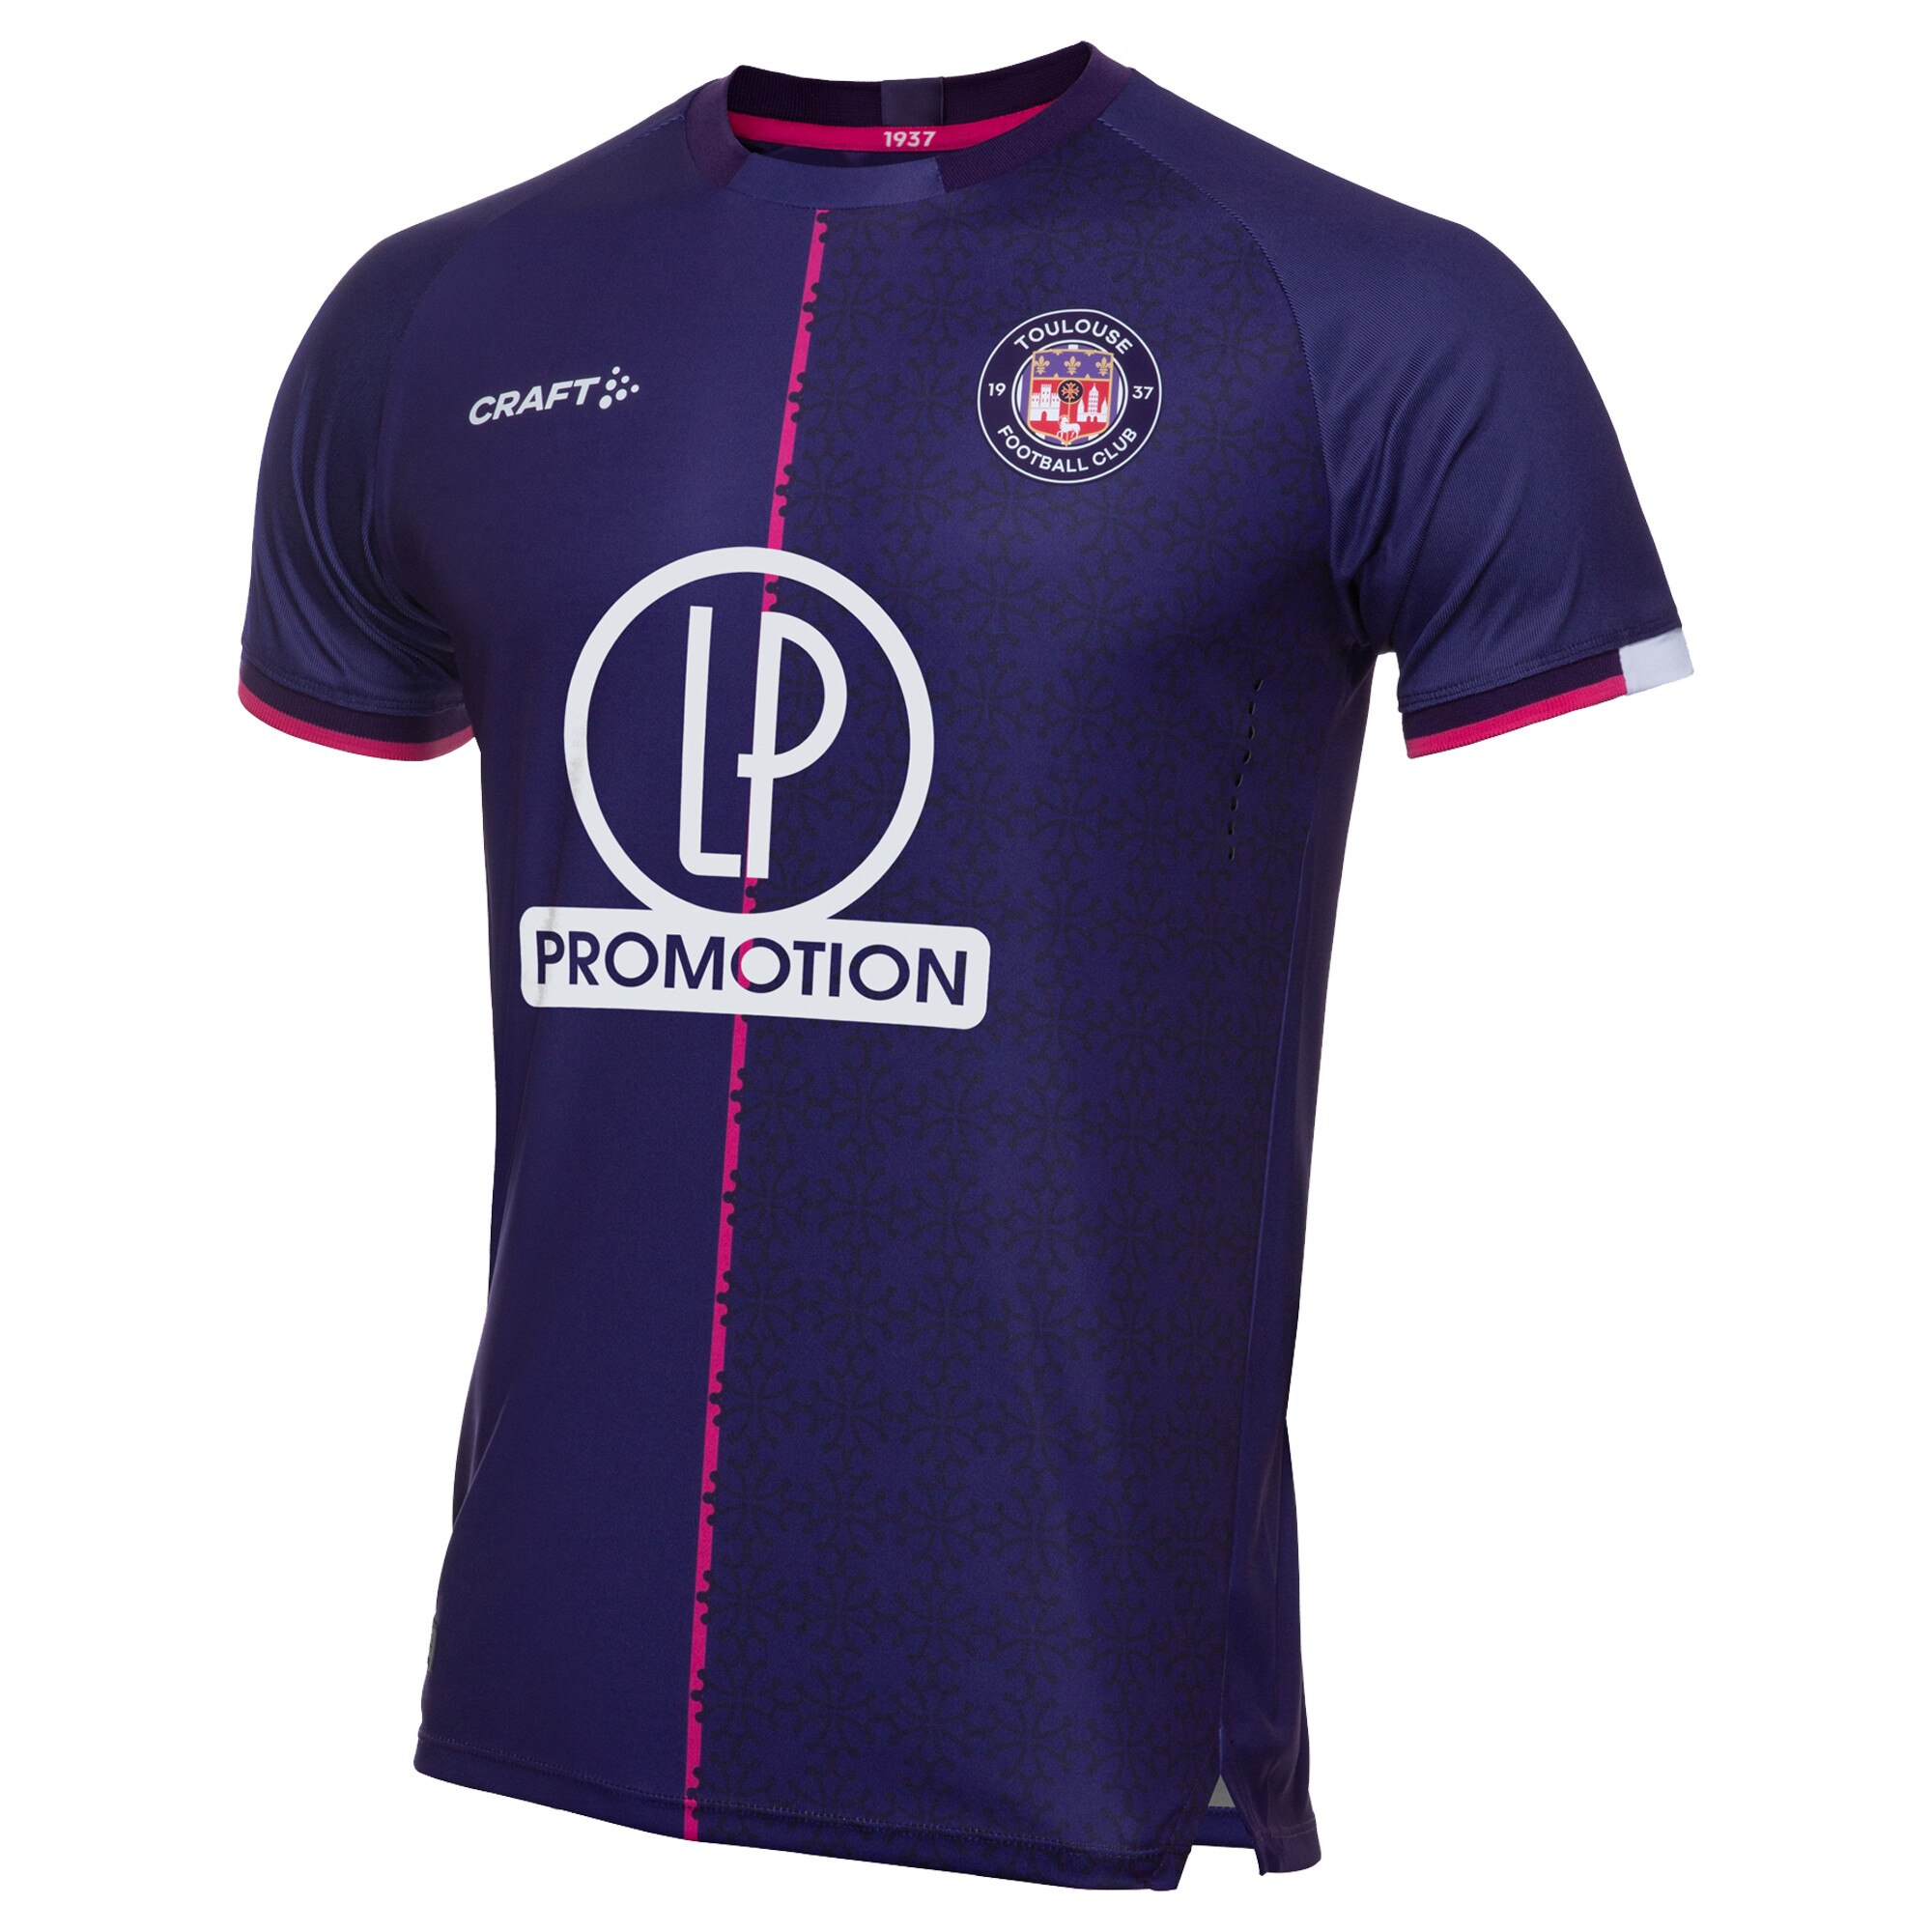 Toulouse Football Club Home Pro Shirt 2021-22 with Van Den Boomen 8 printing